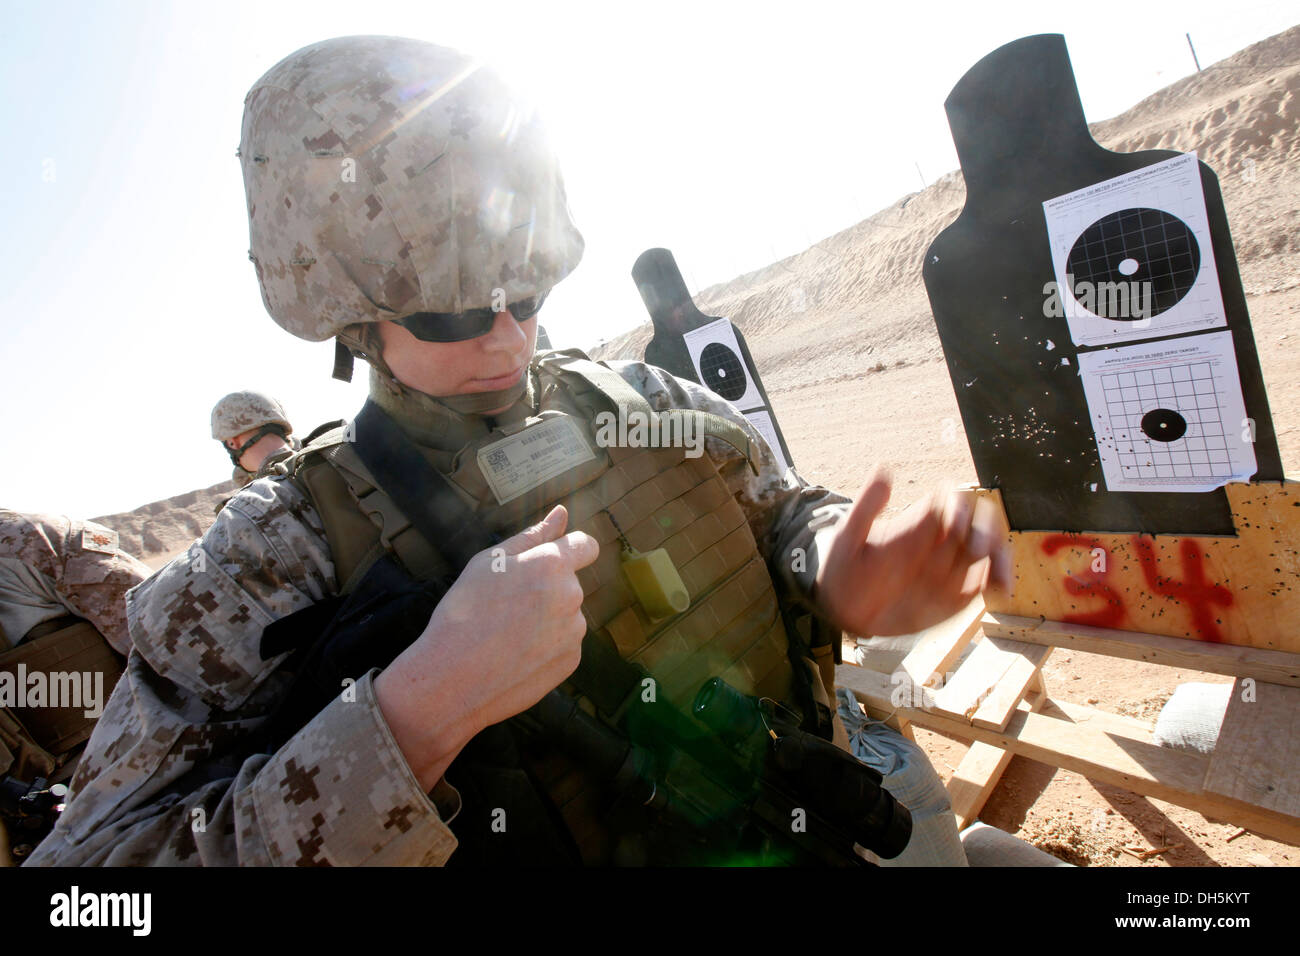 U.S. Navy Hospitalman Lindsay L. Robinson, a corpsman with Headquarters, 2nd Marine Aircraft Wing (Forward), makes adjustments to her M4 service rifle during a Battle Sight Zero (BZO) range at Camp Leatherneck, Helmand province, Afghanistan, Oct. 25, 2013 Stock Photo